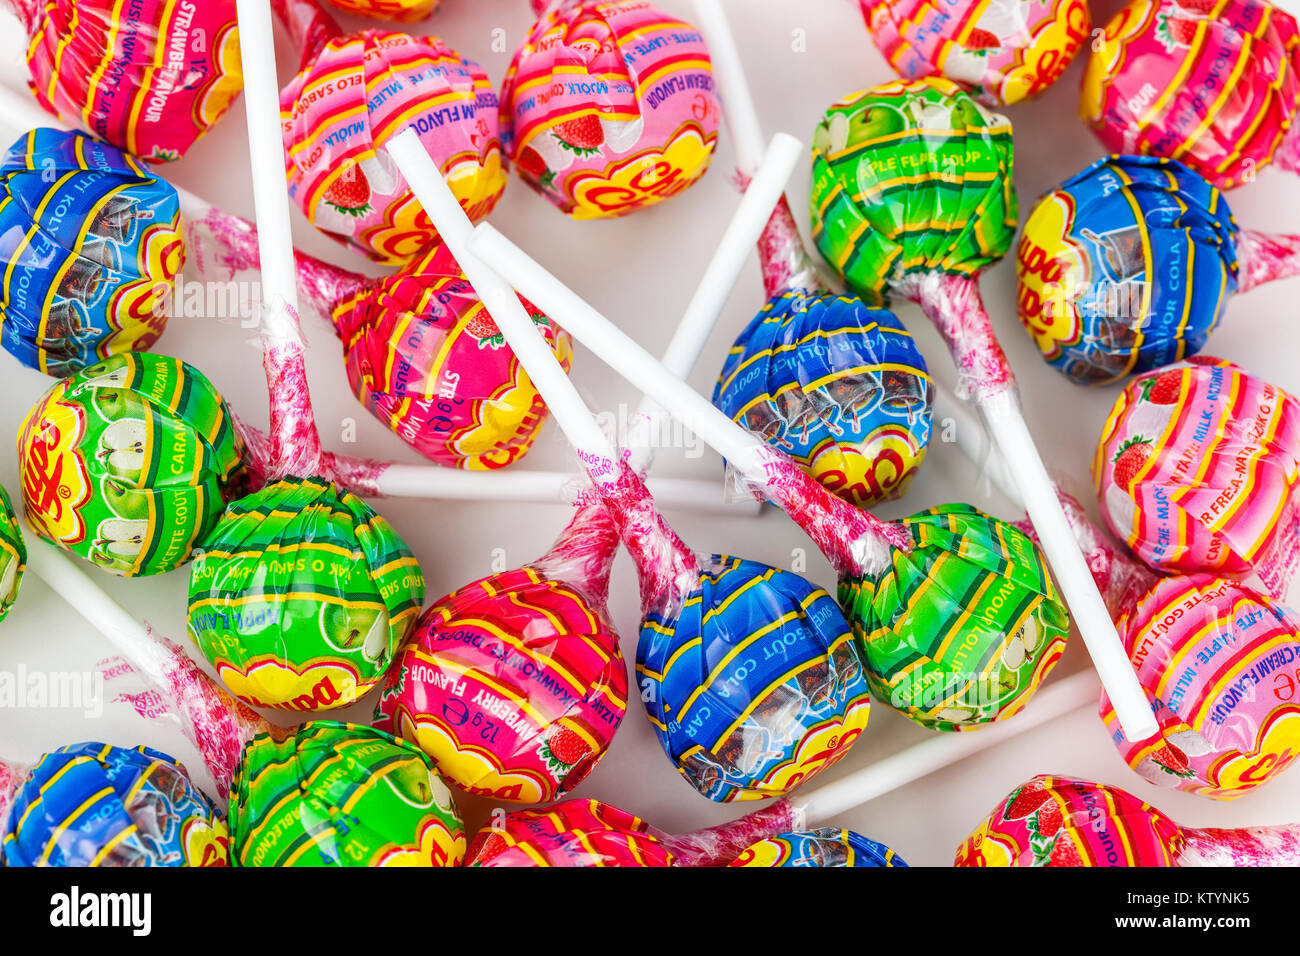 Variety of multi coloured lolly pops with white sticks in wrappers laying on a sweet counter Stock Photo